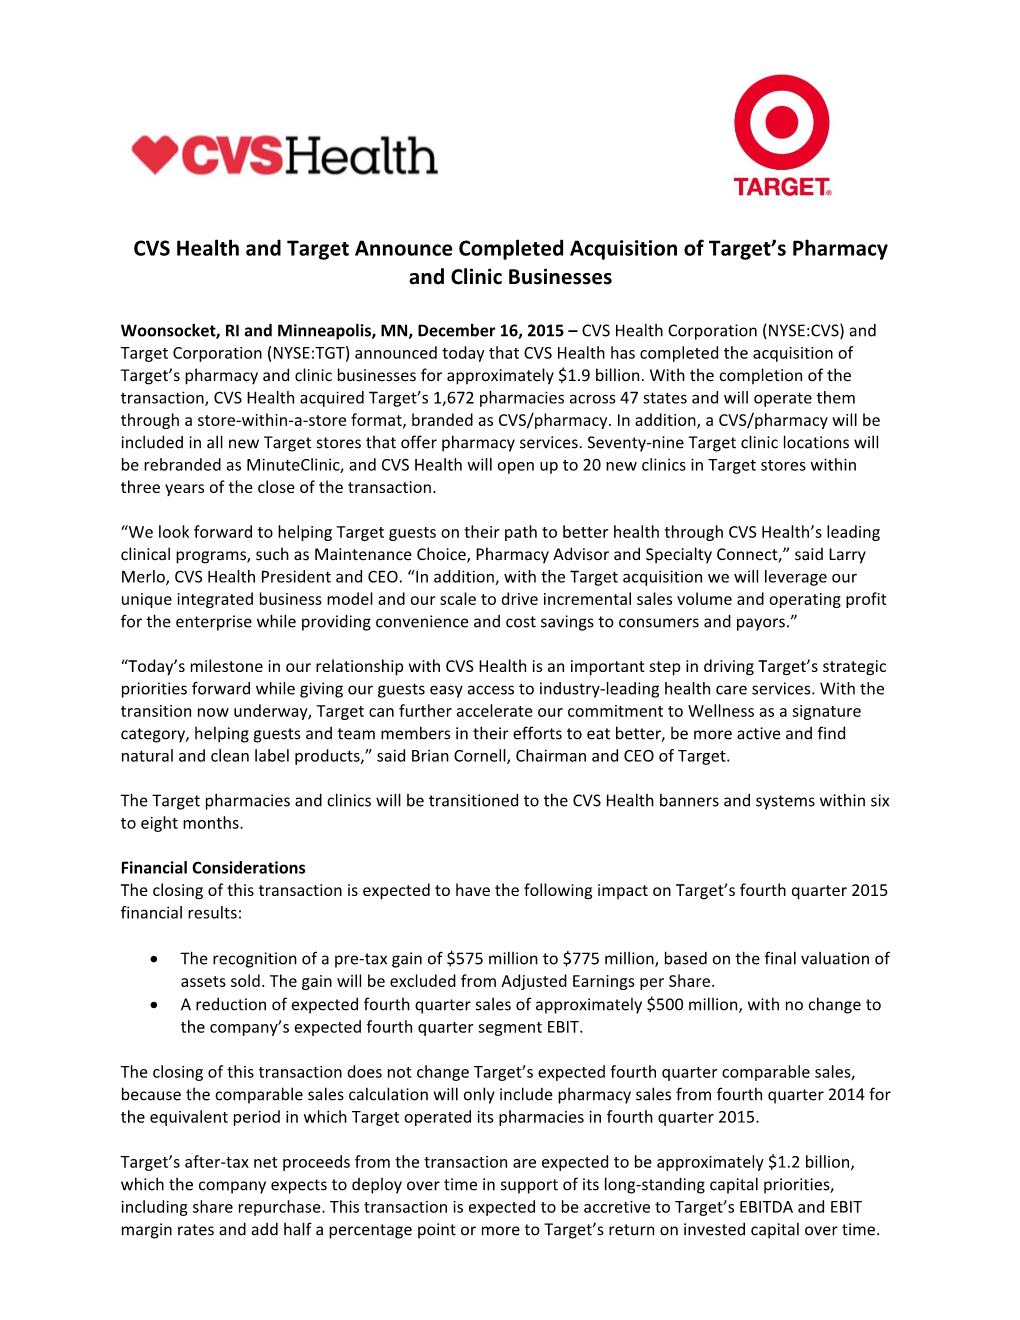 CVS Health and Target Announce Completed Acquisition of Target's